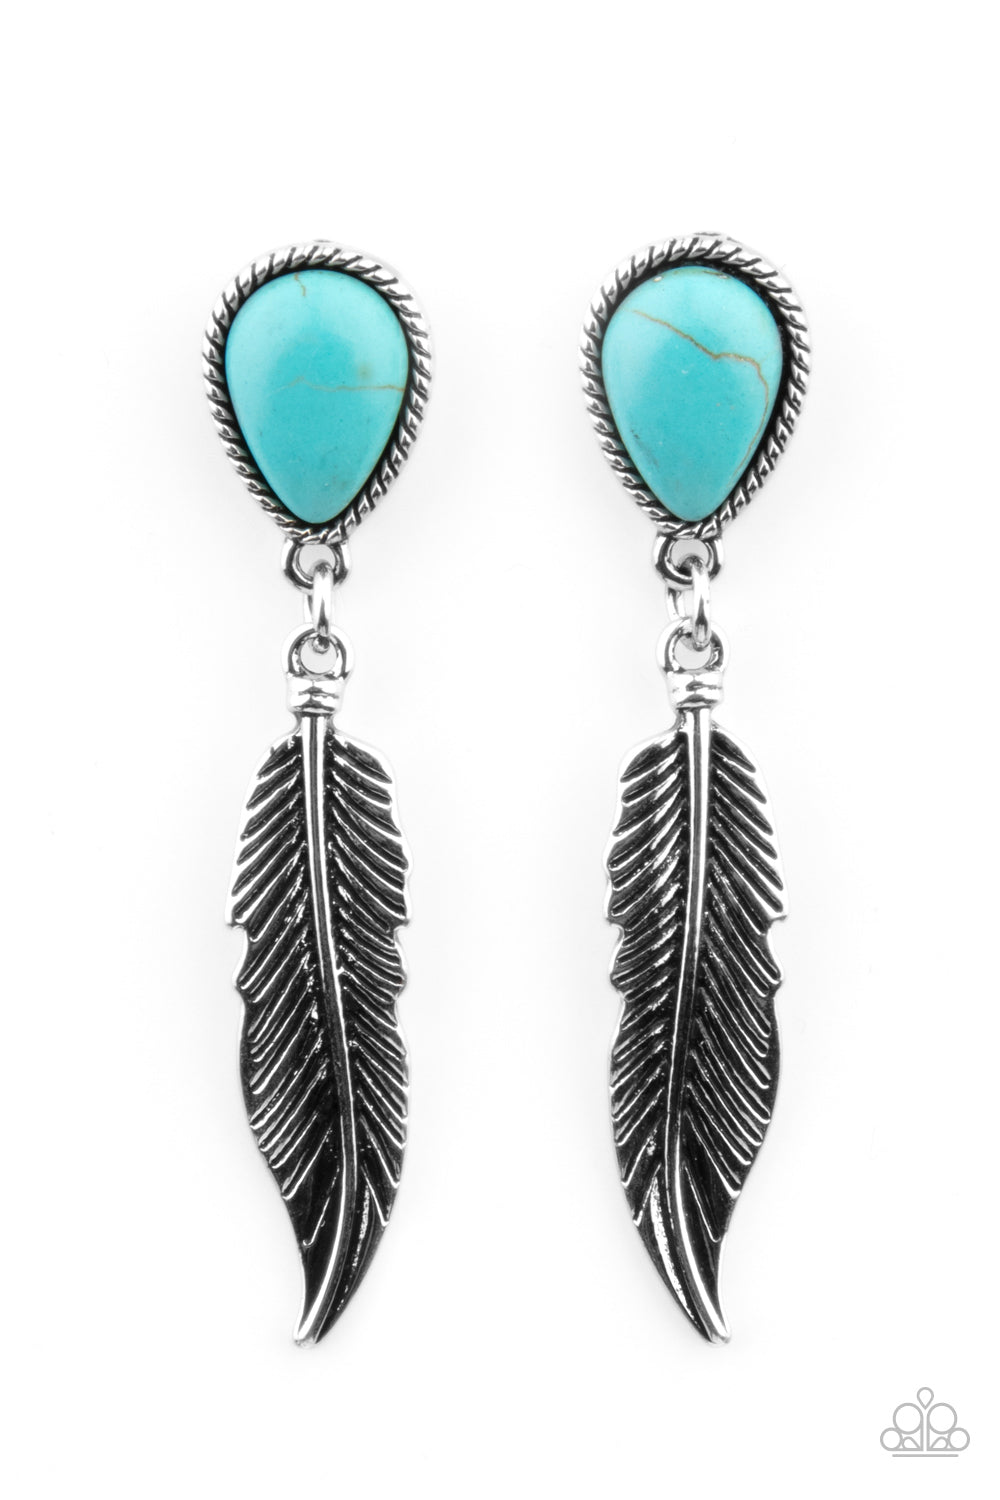 Totally Tran-QUILL - blue - Paparazzi earrings